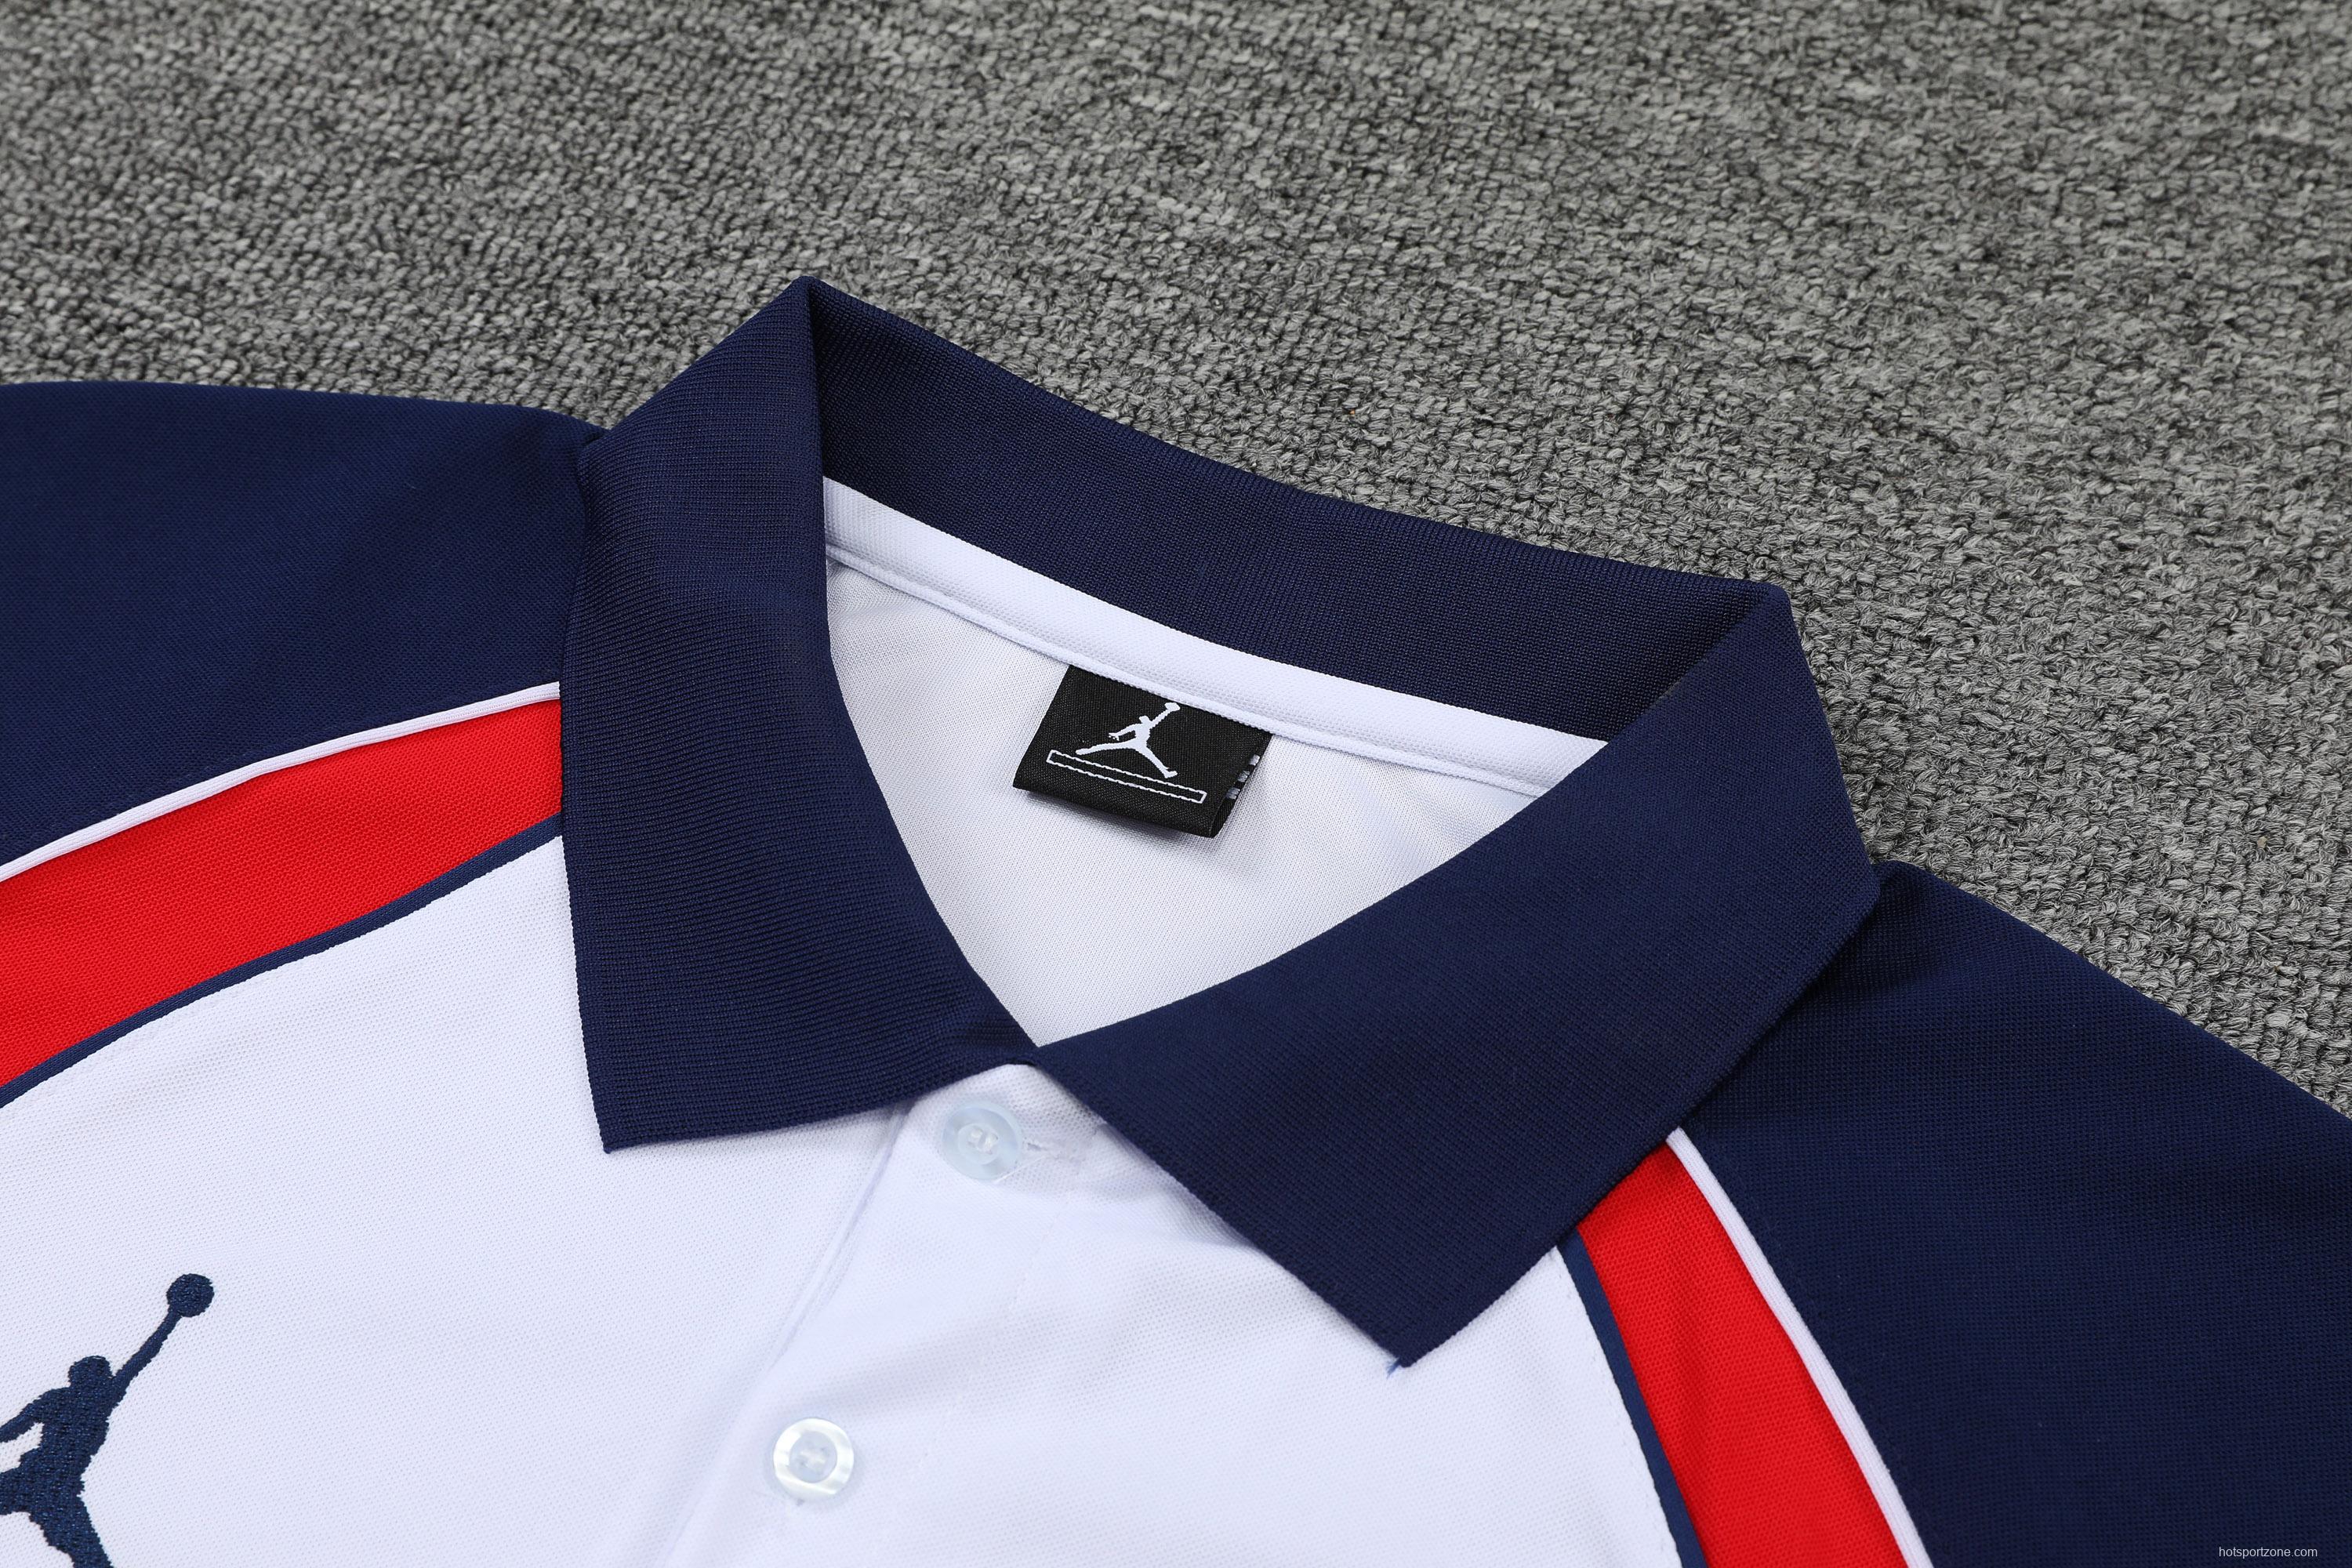 PSG X Jordan POLO kit white and red edge (not supported to be sold separately)